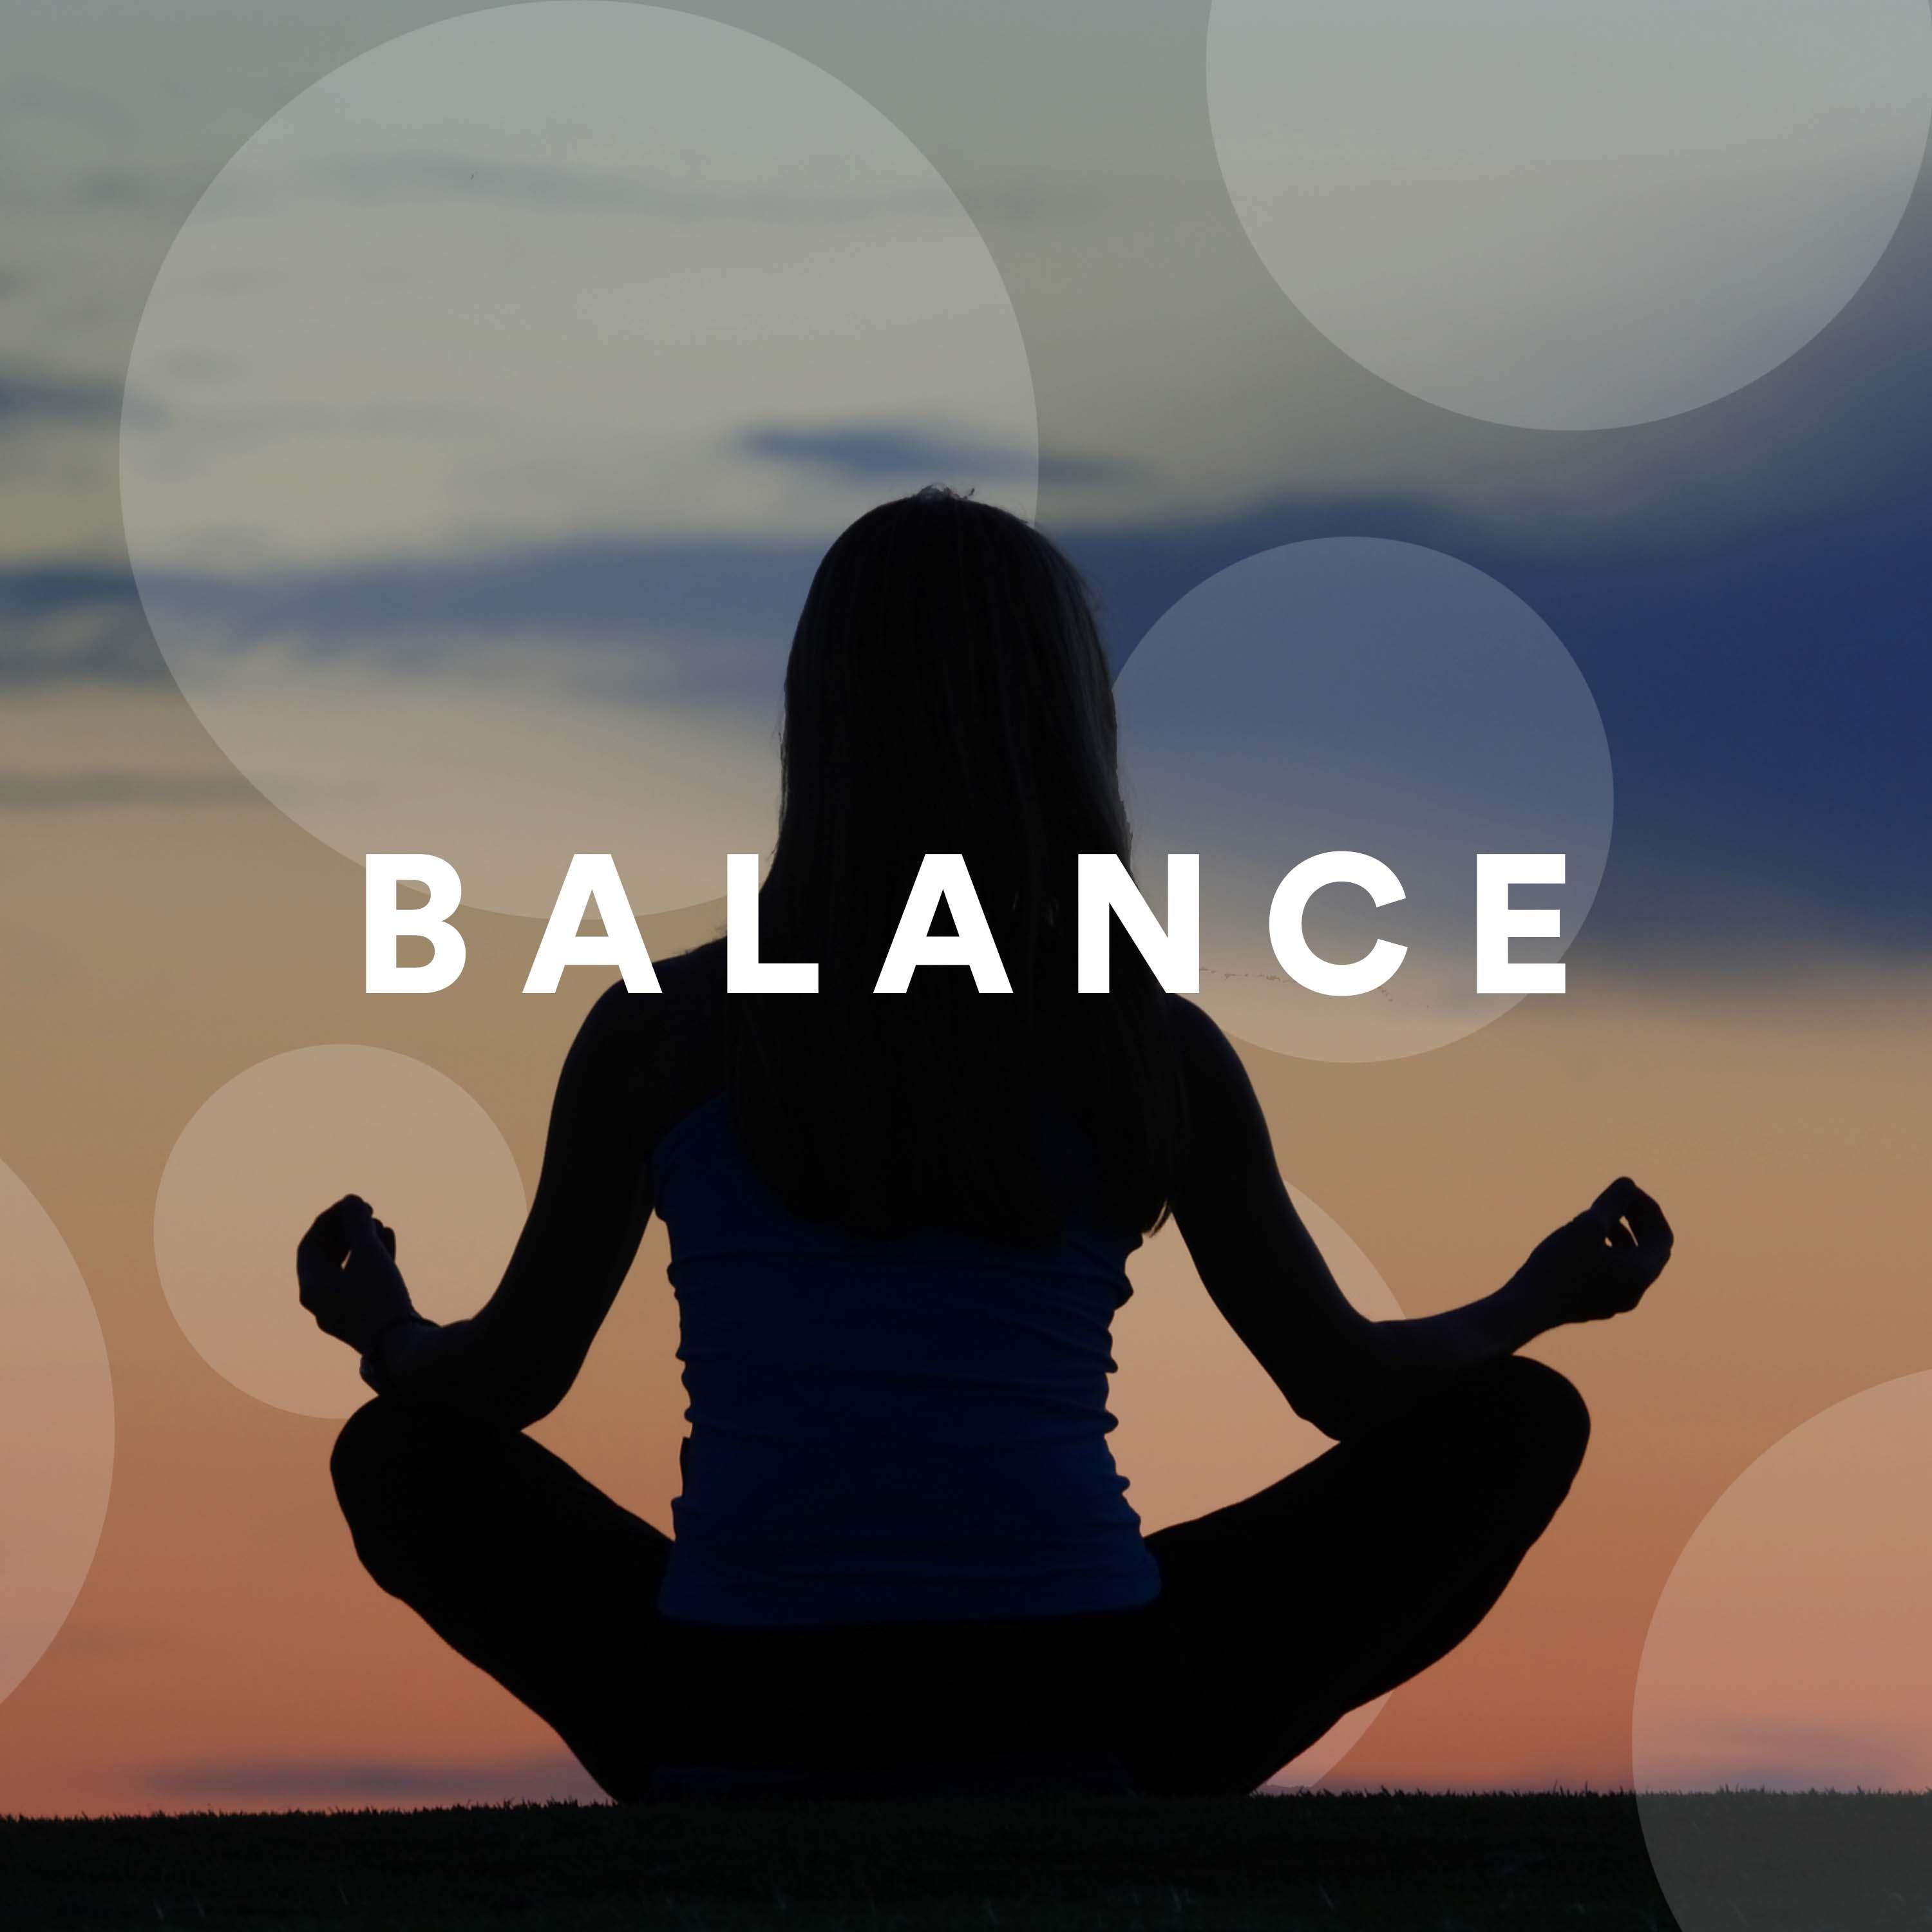 Balance - Instrumental Music to Find Peace, Tranquility, Serenity and Calm